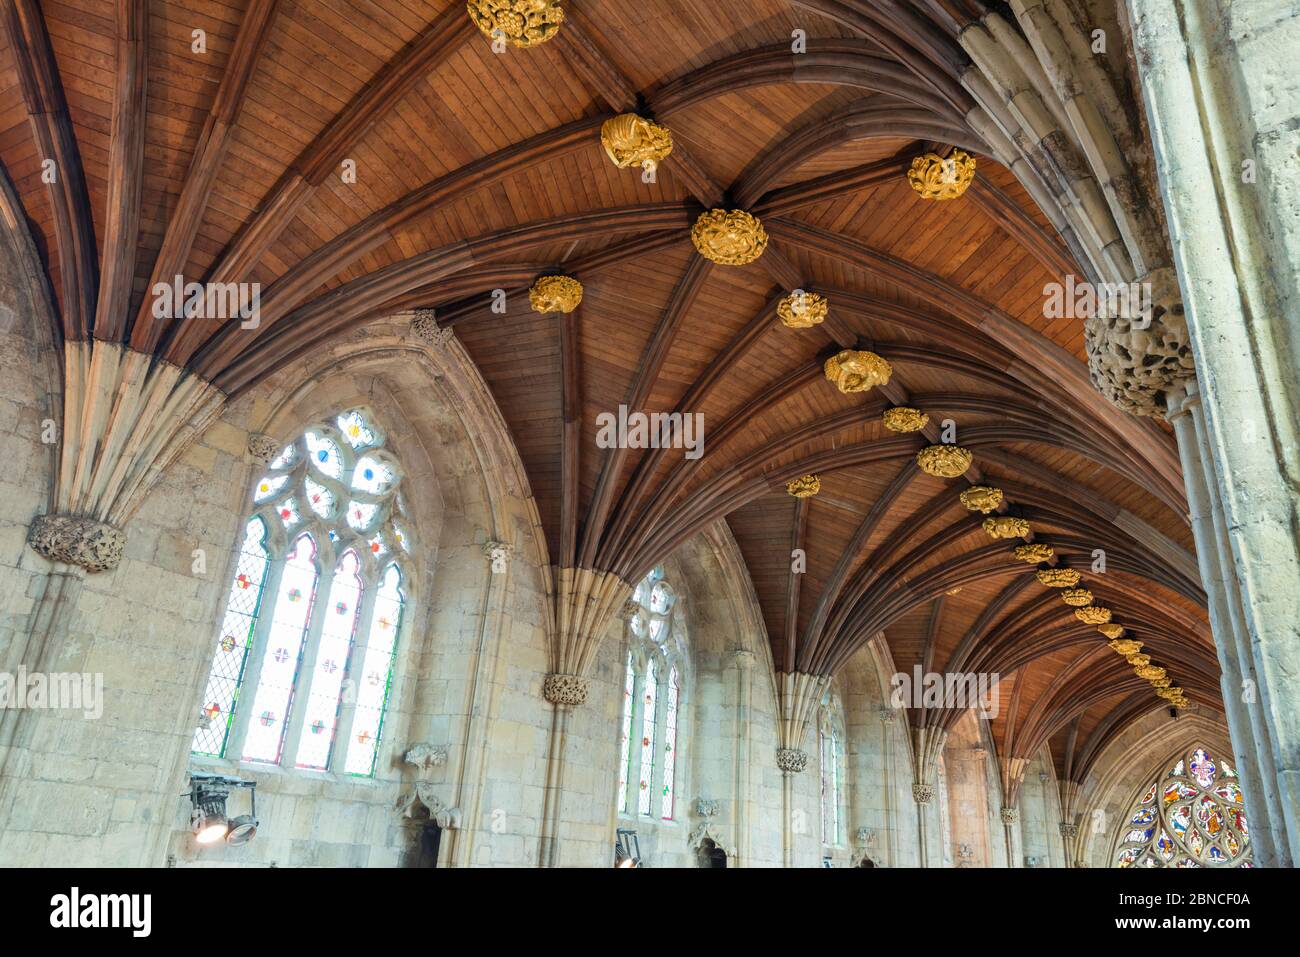 Wooden fan vaulting and gold painted roof bosses inside Selby Abbey in North Yorkshire, England Stock Photo